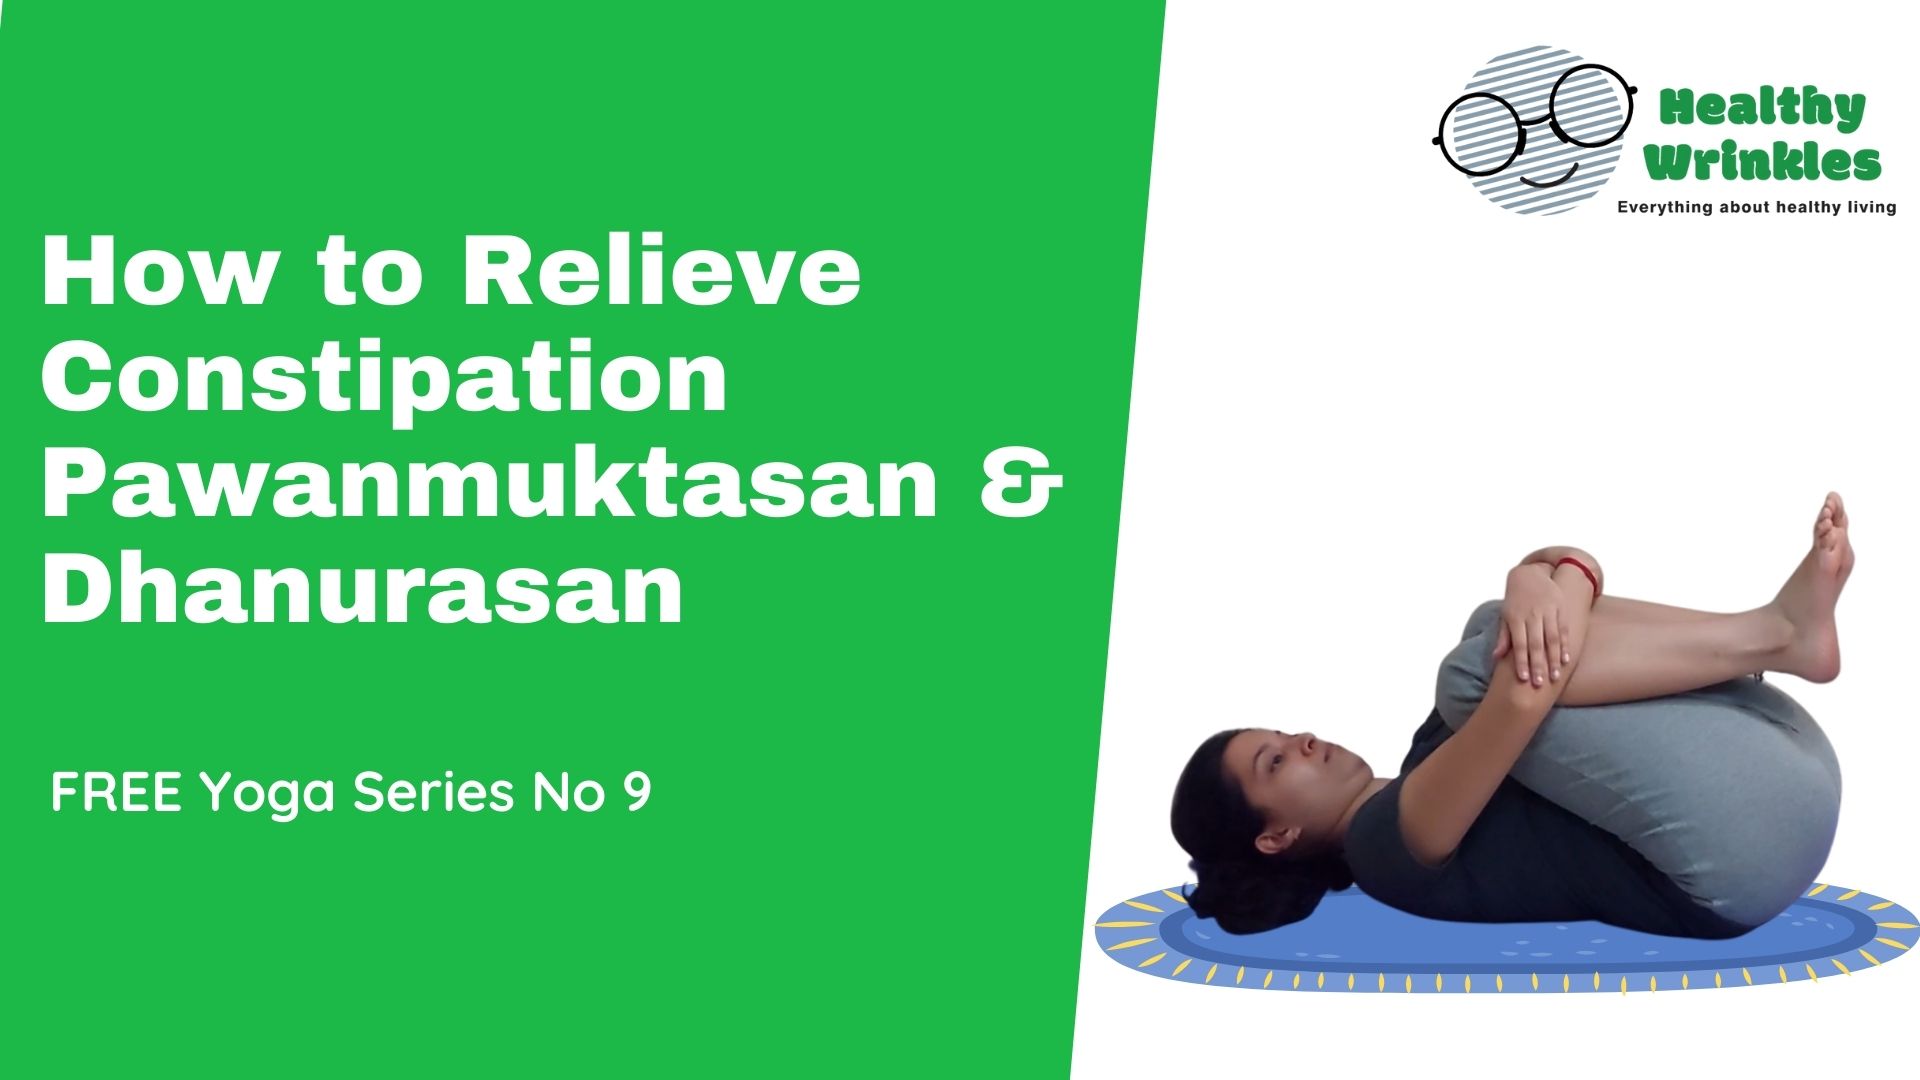 5 Yoga Poses To Relieve Constipation